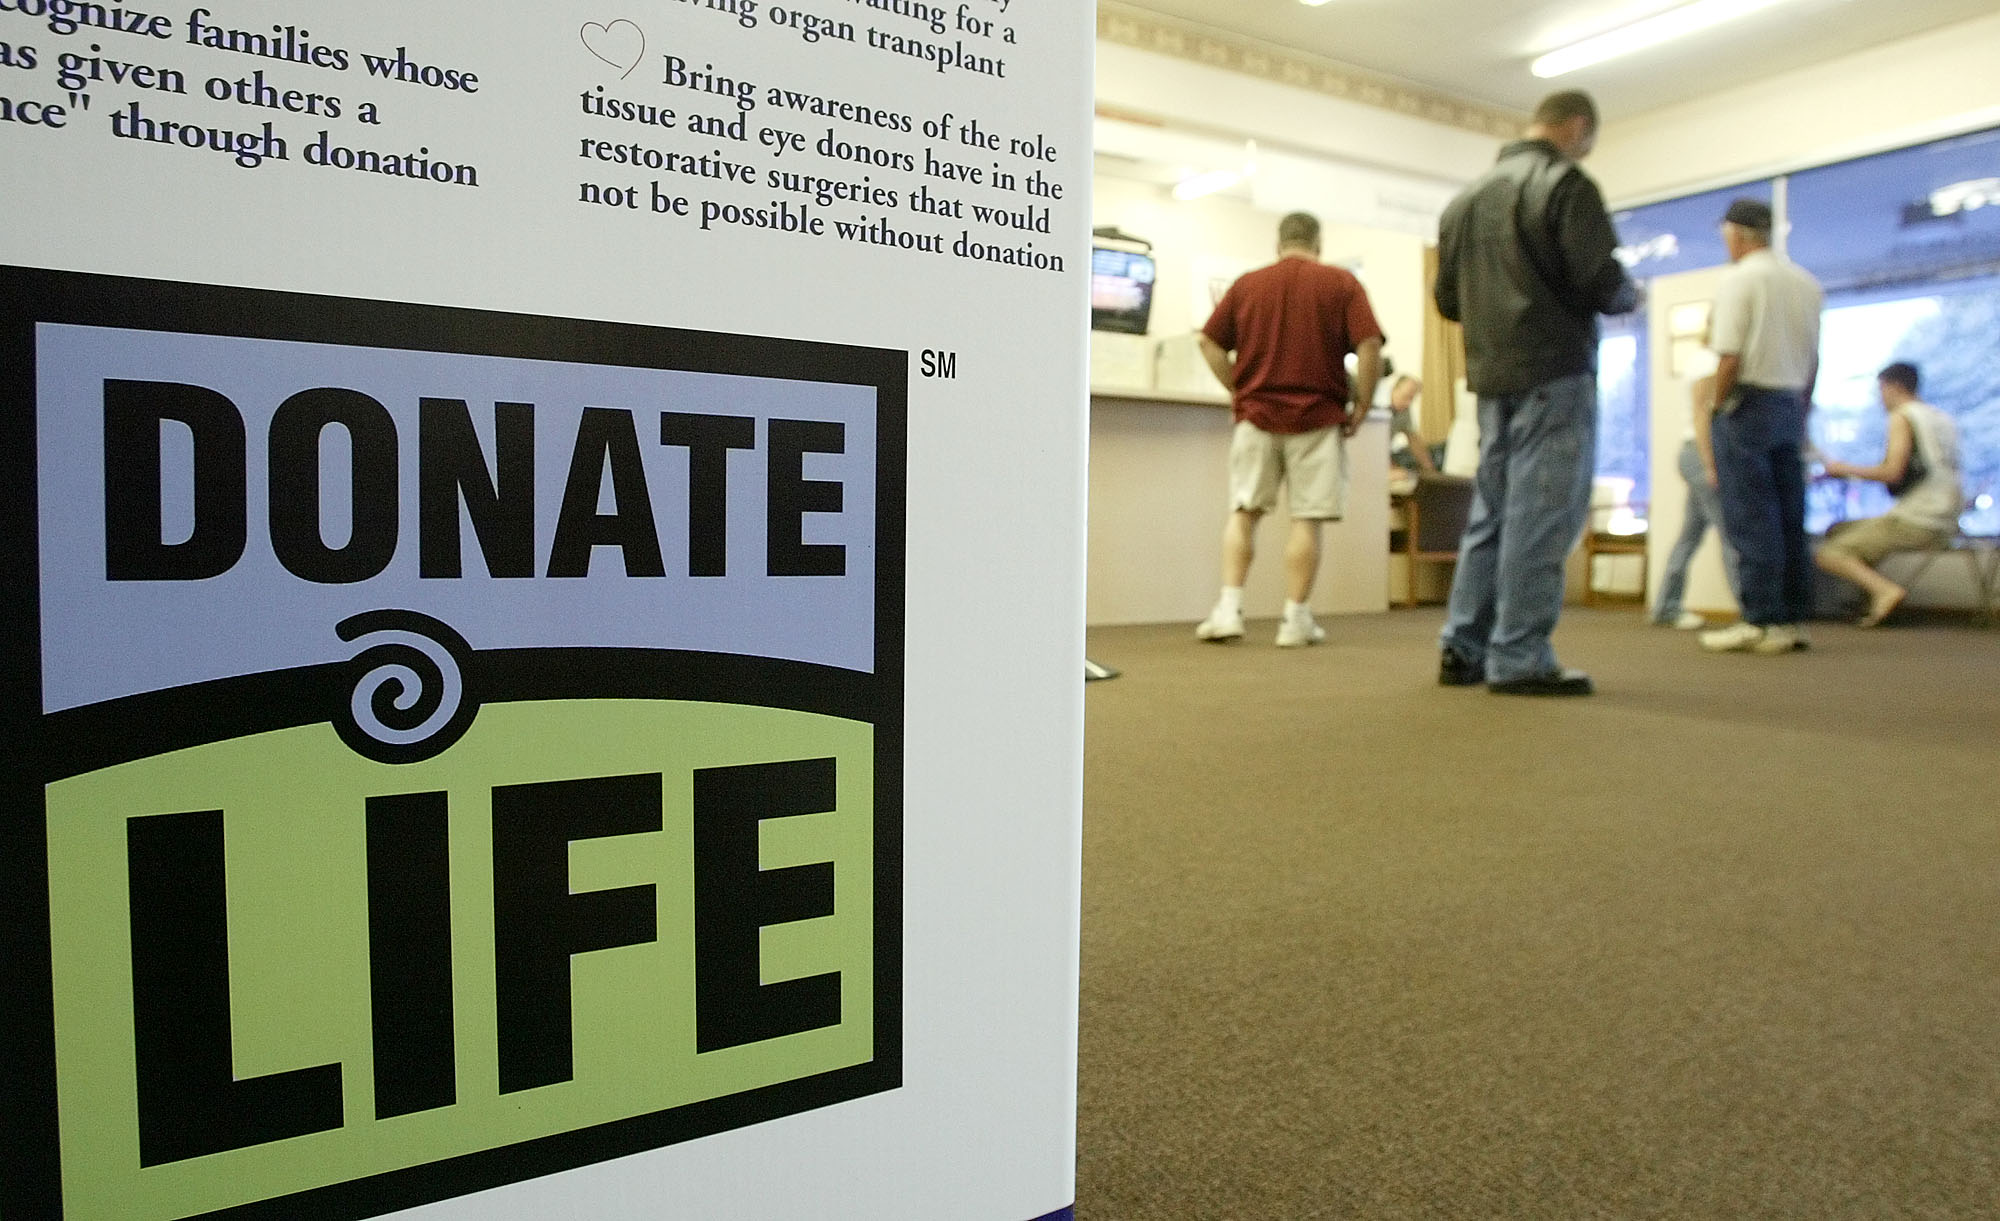 "Donate Life" sign